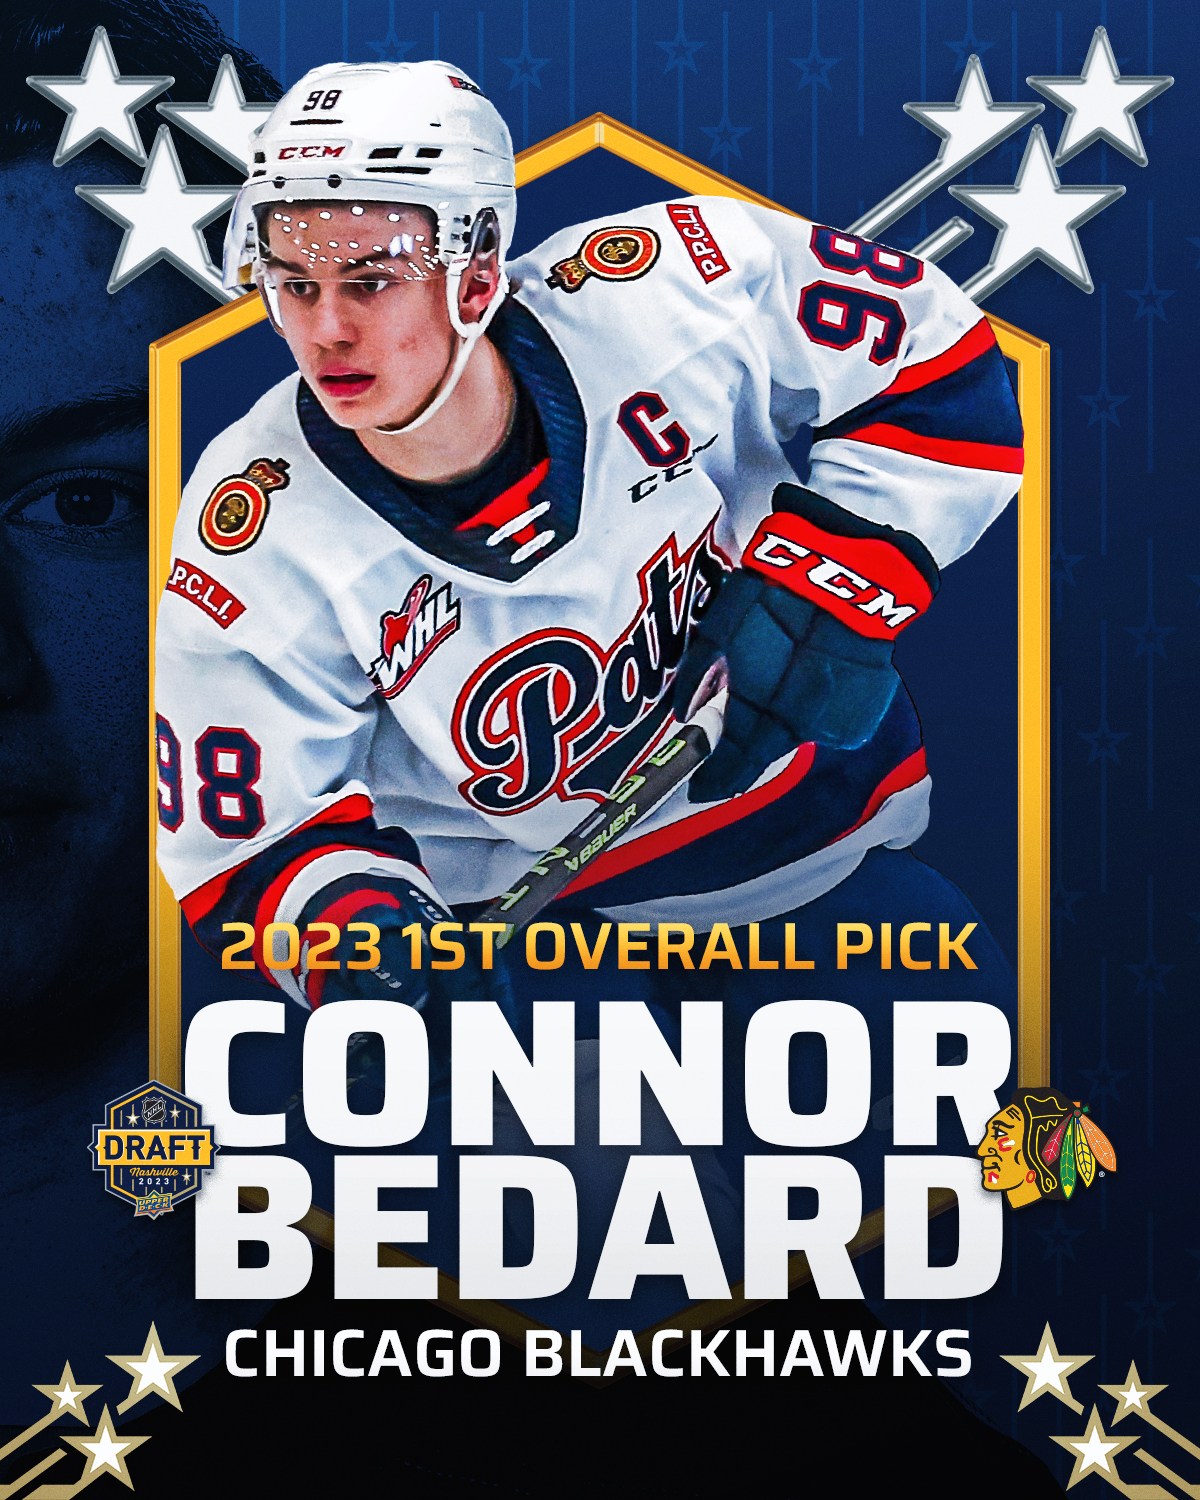 Blackhawks select Connor Bedard with the No. 1 pick in the 2023